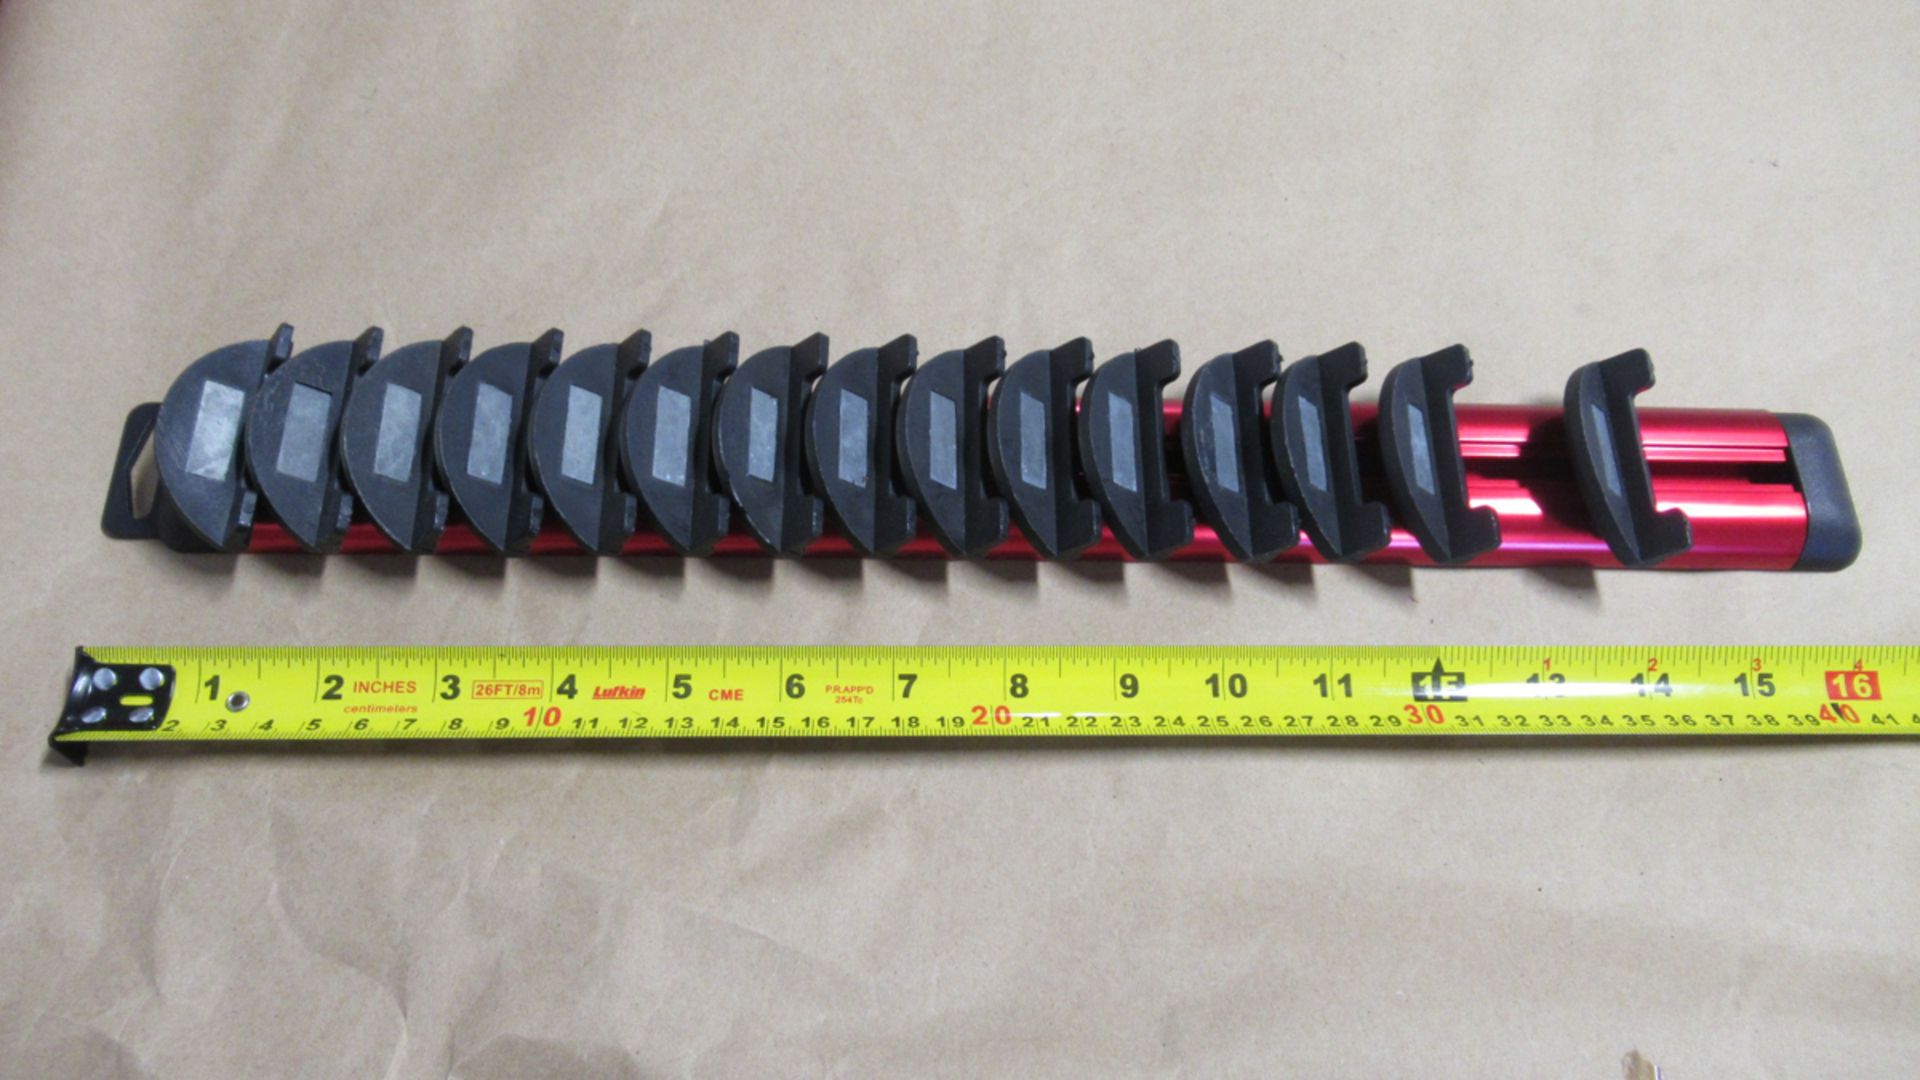 15 PC MAGENETIC WRENCH HOLDER RED EZ RED WR1500